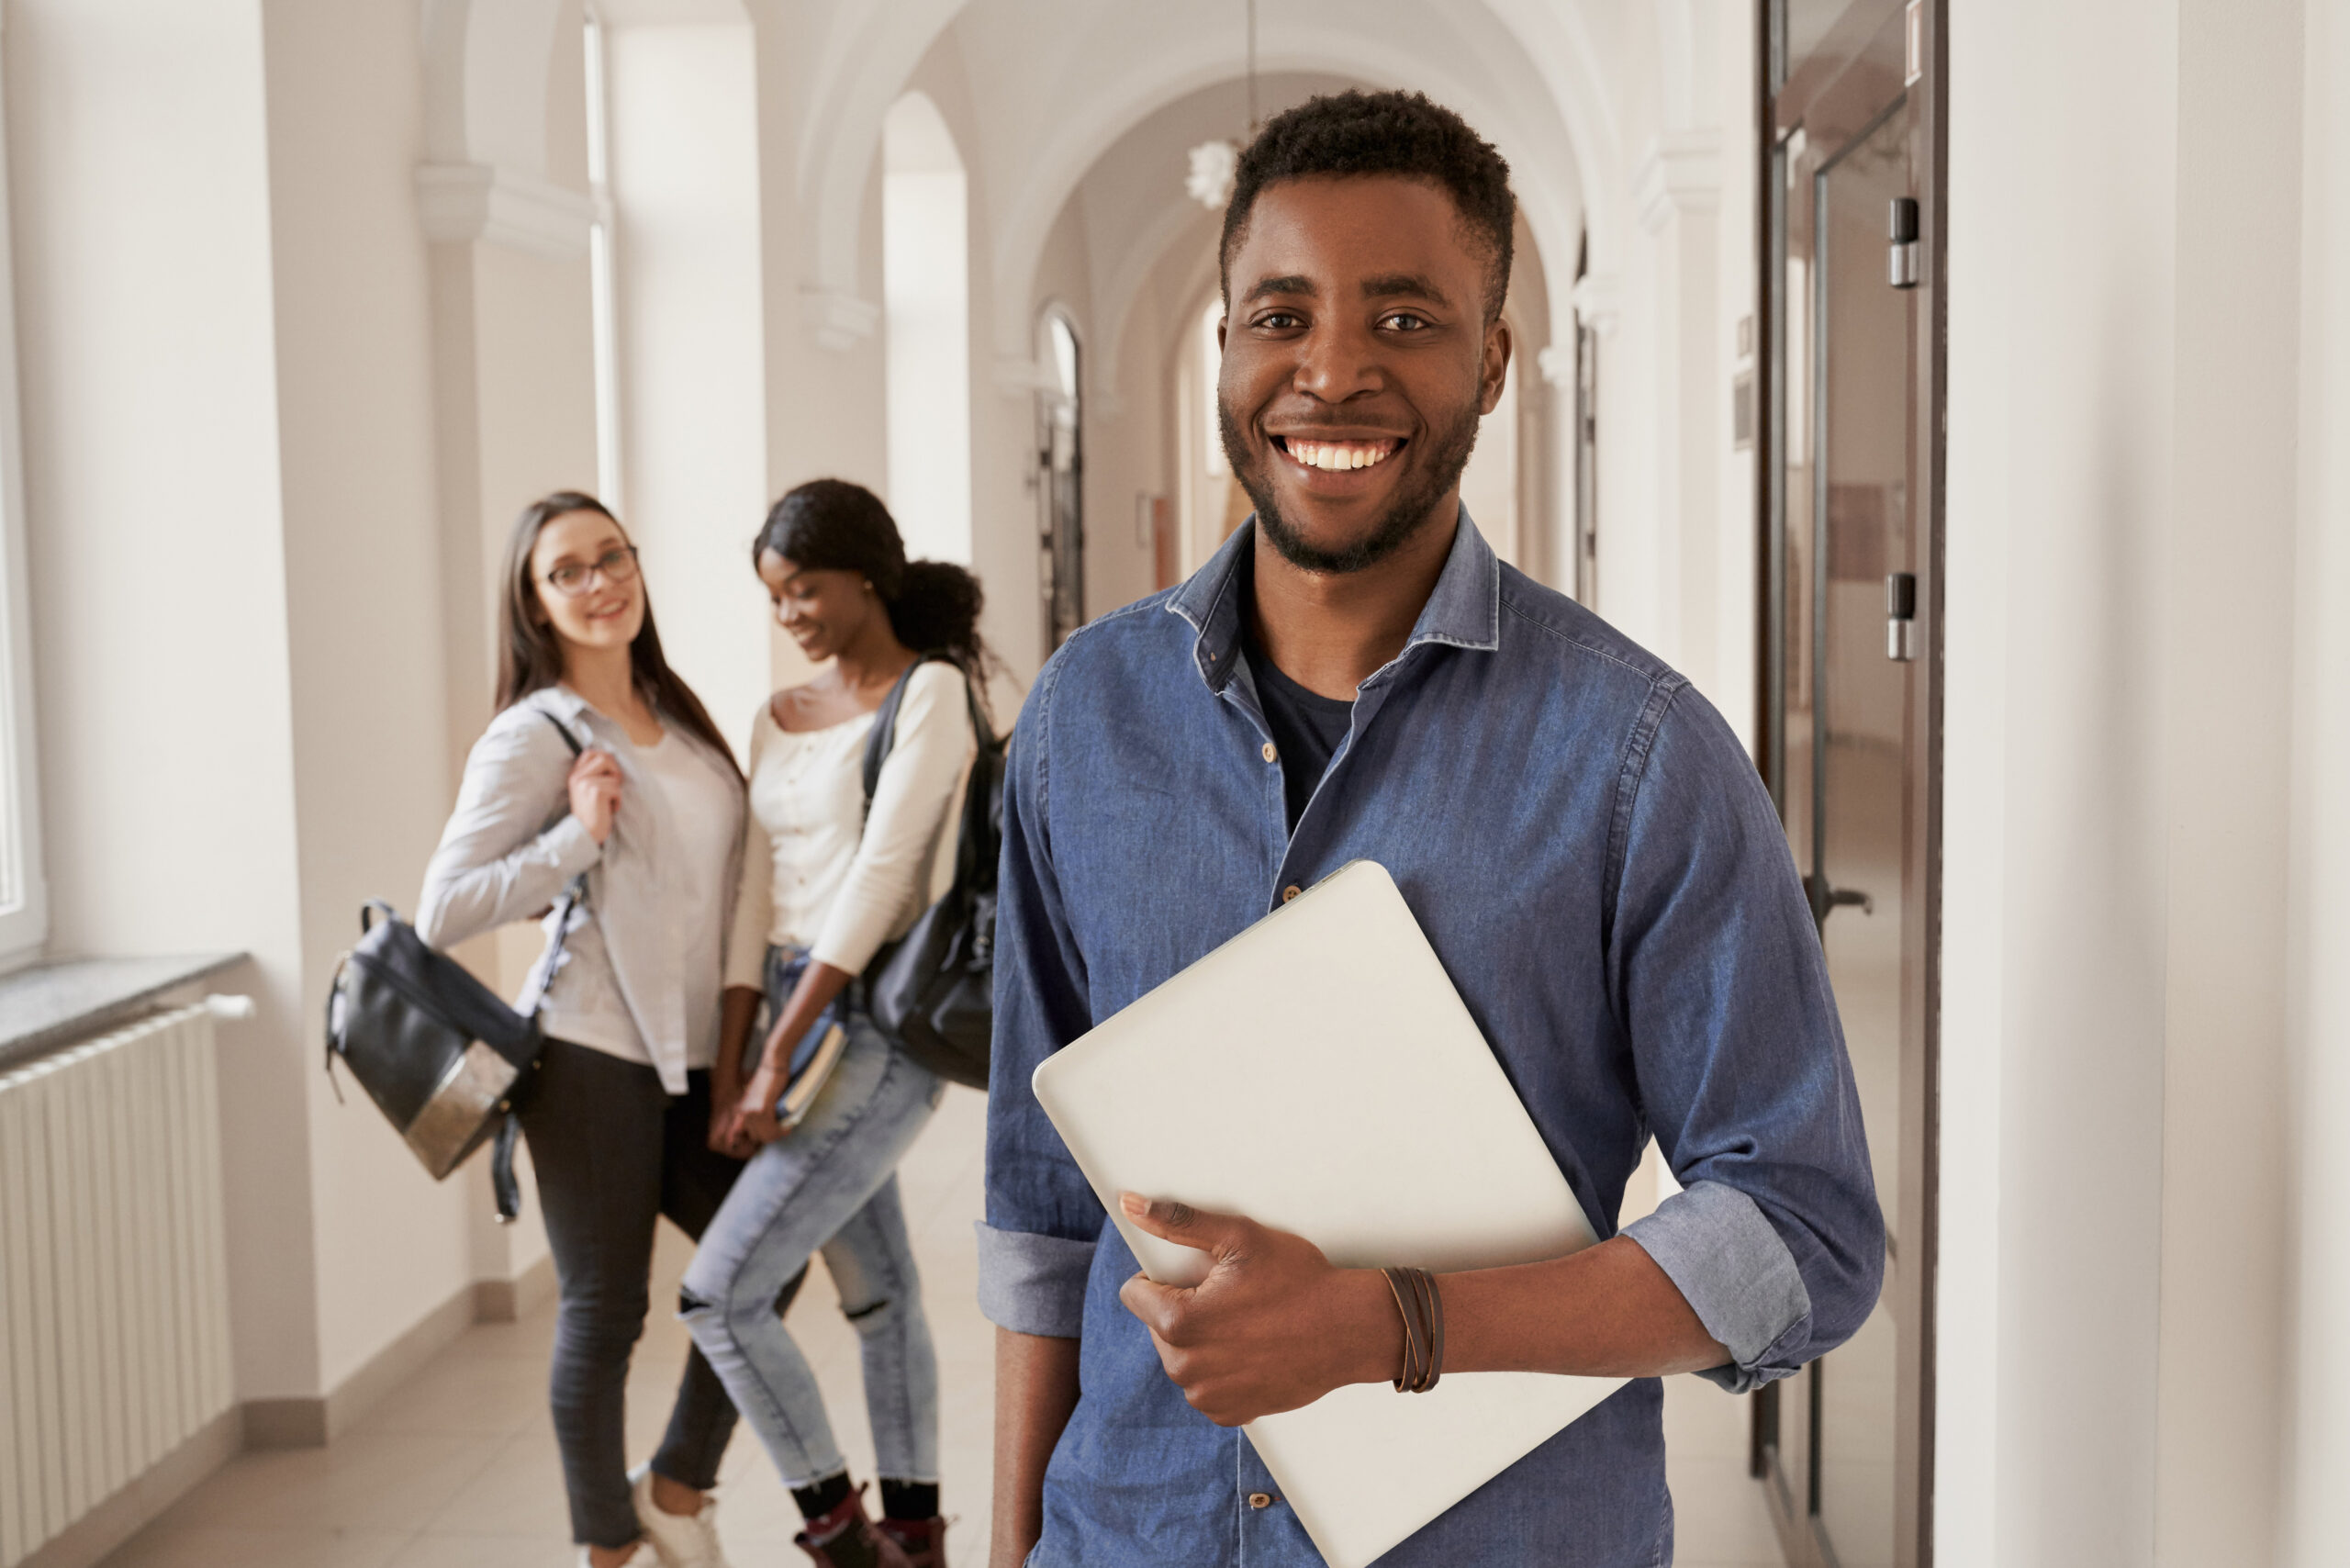 Positivity African student wearing shirt holding notes, going to lecture and smiling. Happy male studying at international university. Two pretty girls with backpacks on background.